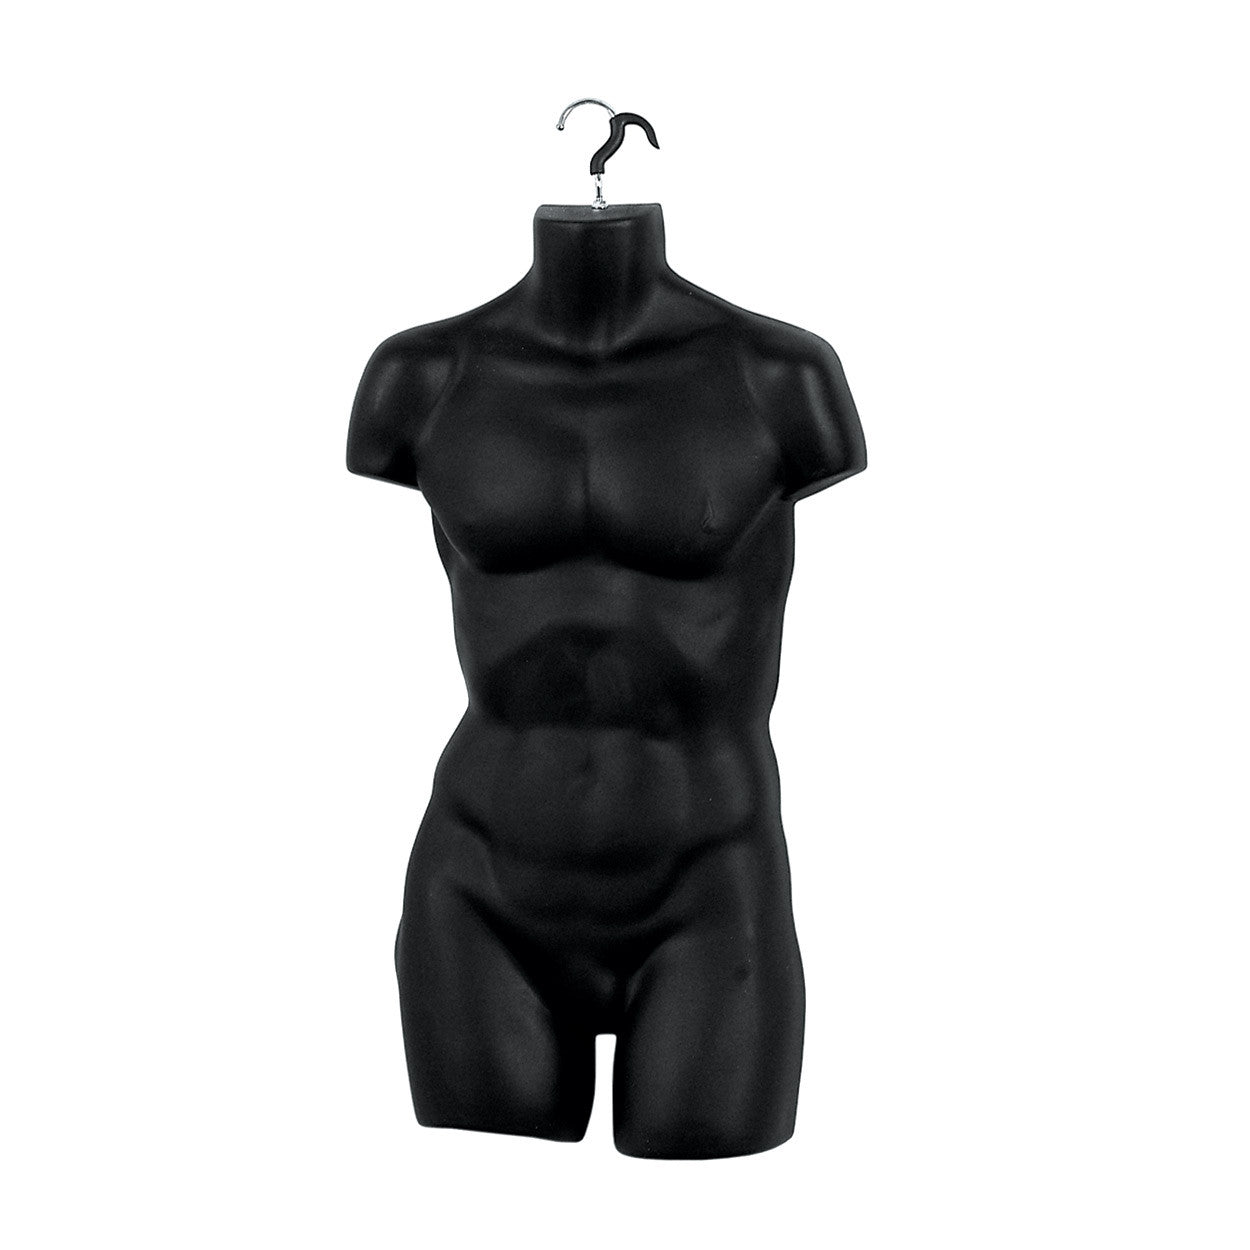 Male M-L Torso Front with Hanging Hook - H865